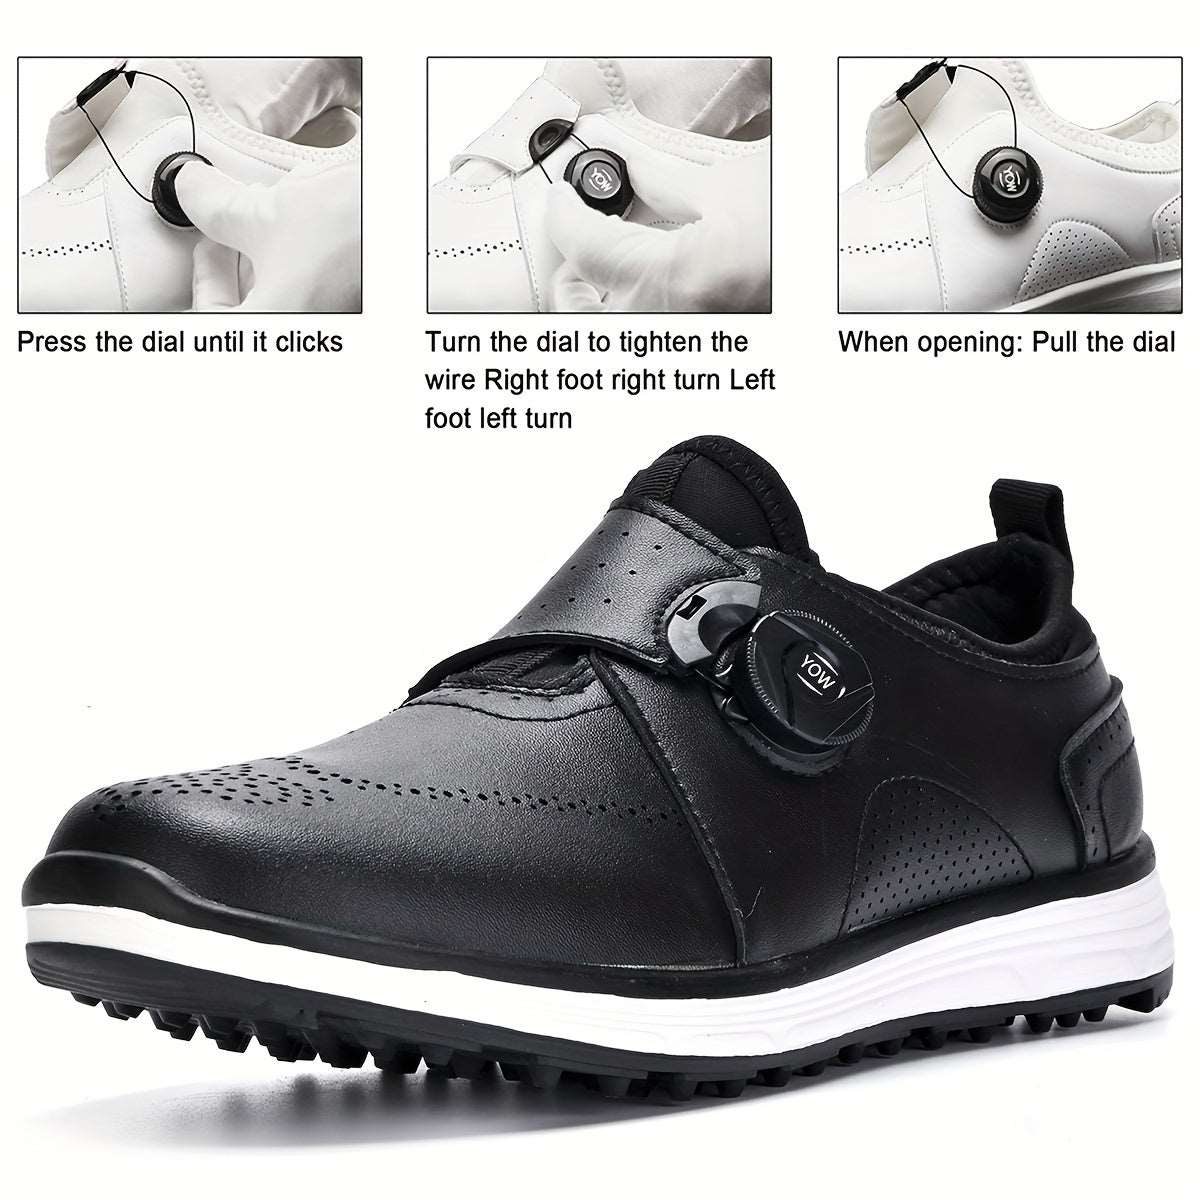 Men's Professional Breathable Waterproof Golf Shoes With Non-Slip Rotary Buckle